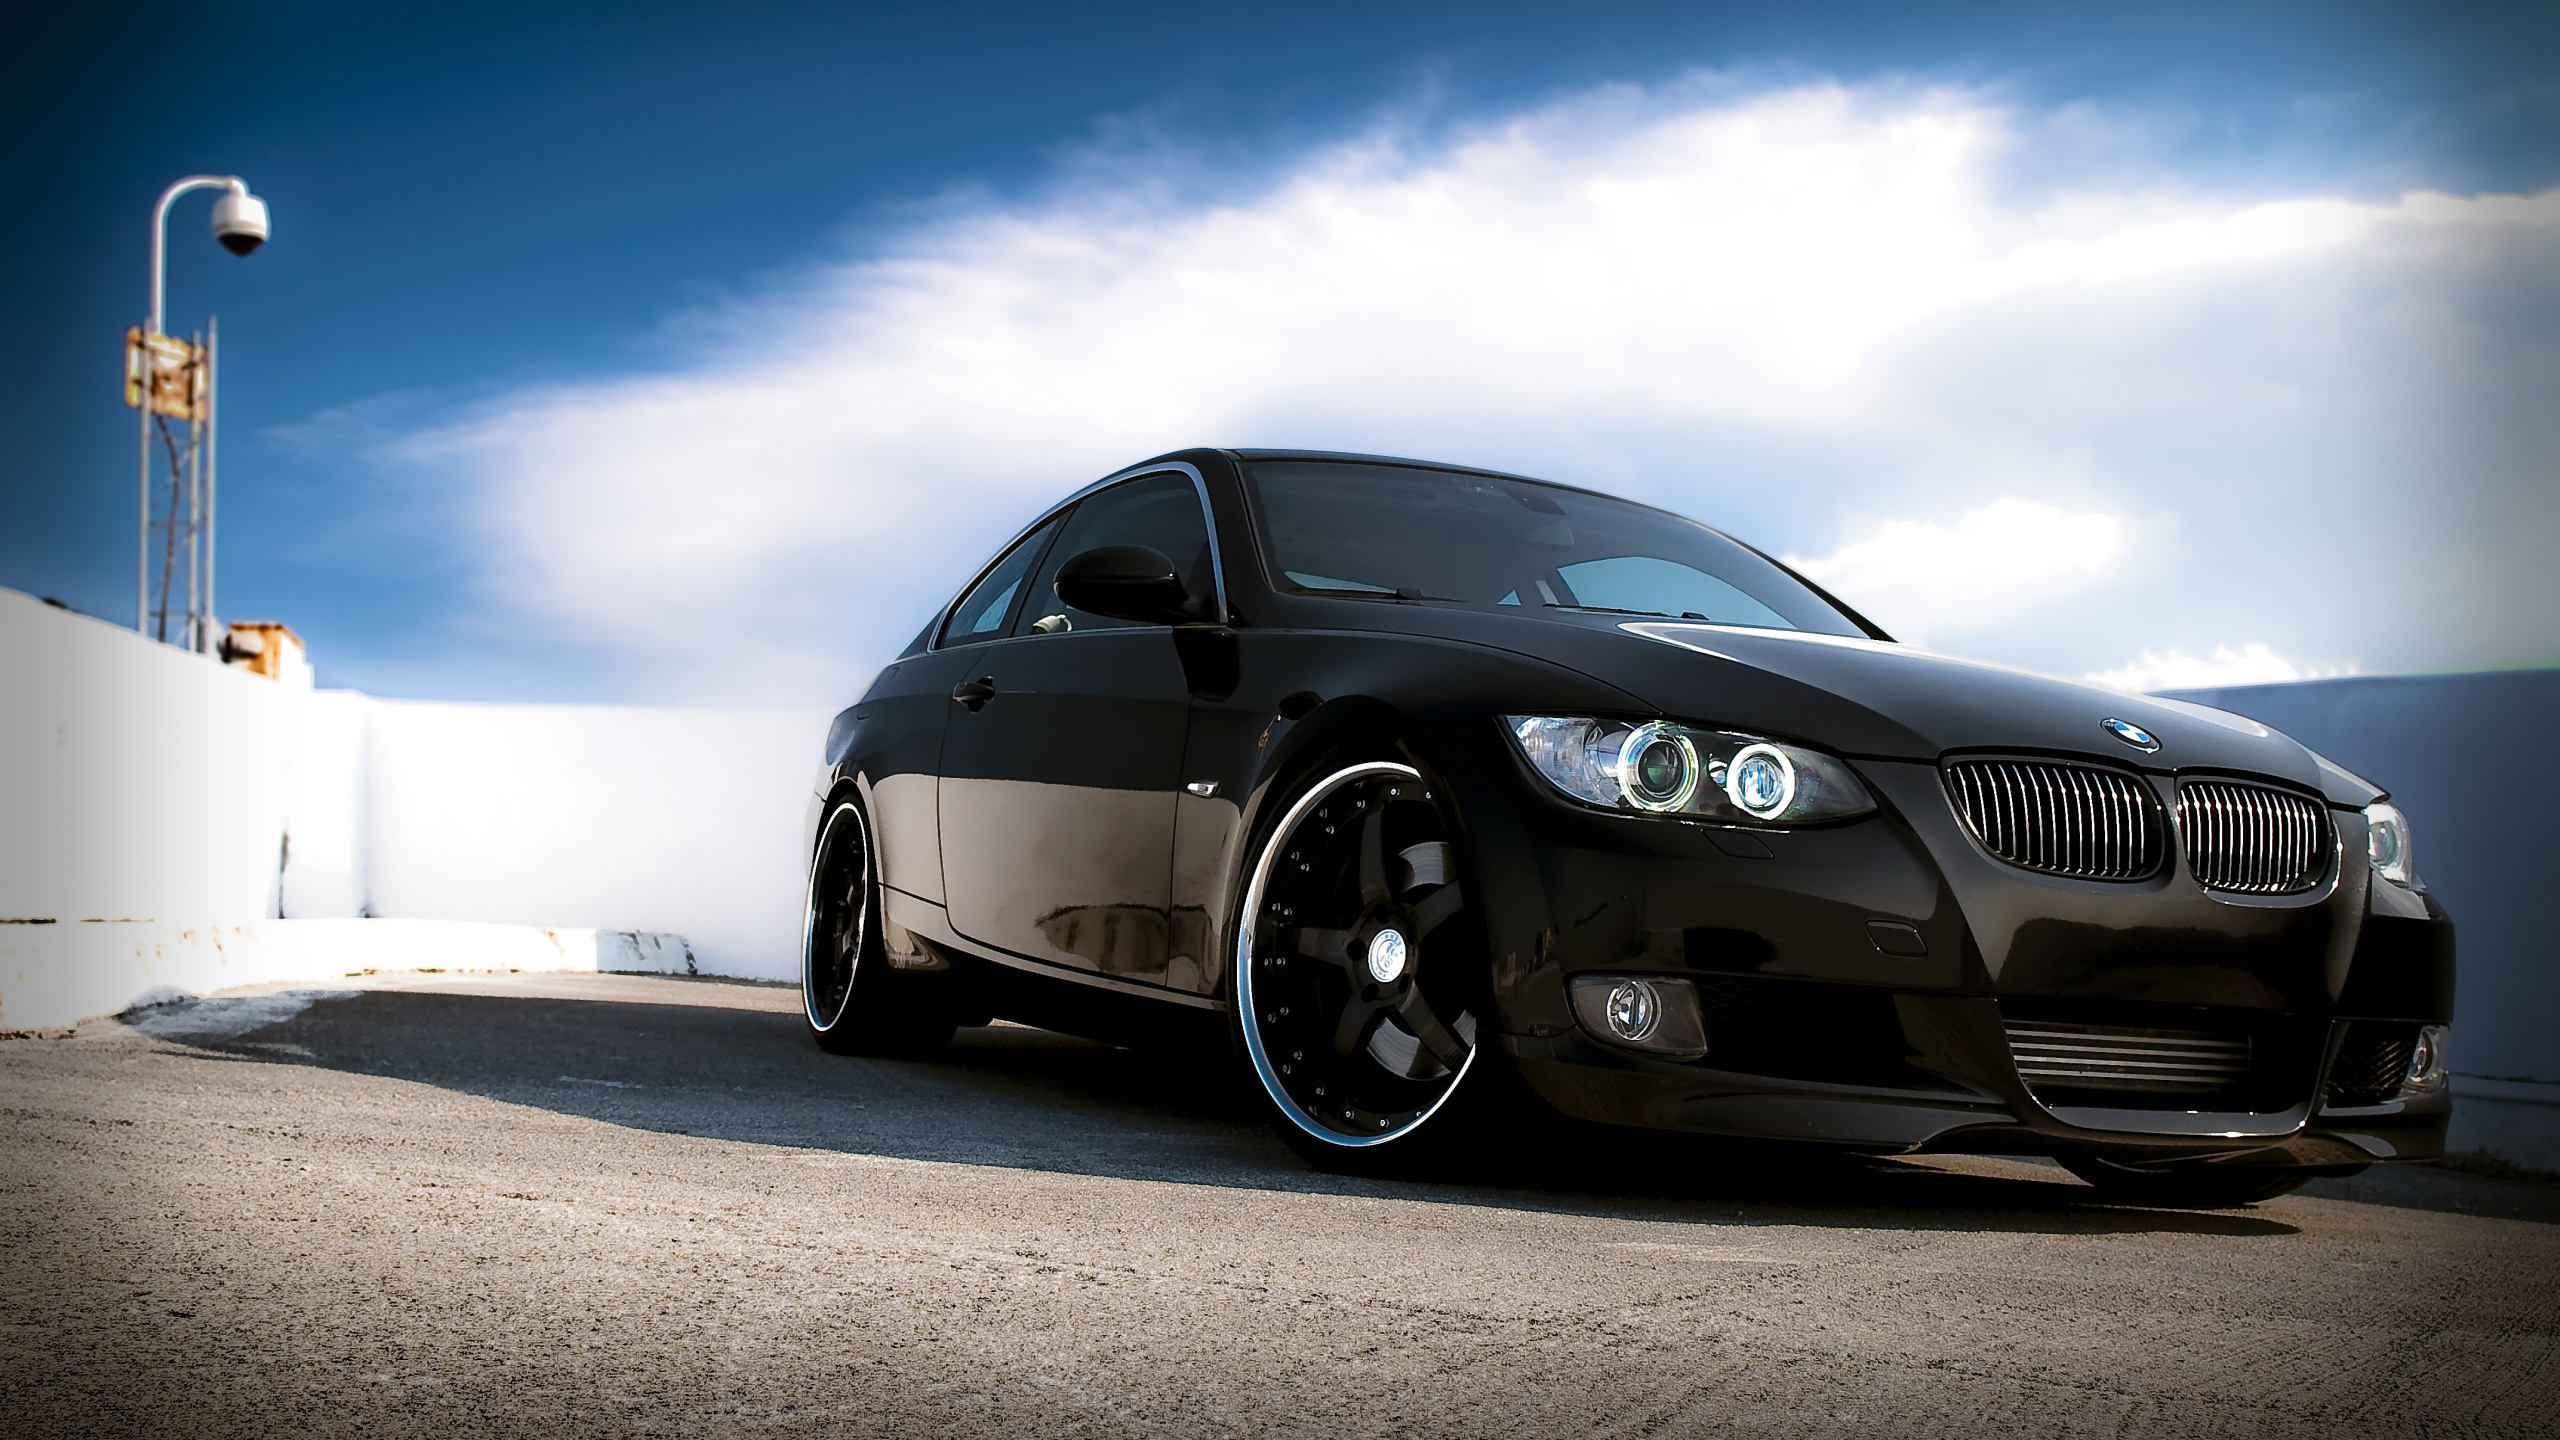 Black Bmw m 3 Coupe. Wallpaper in 2560x1440 Resolution